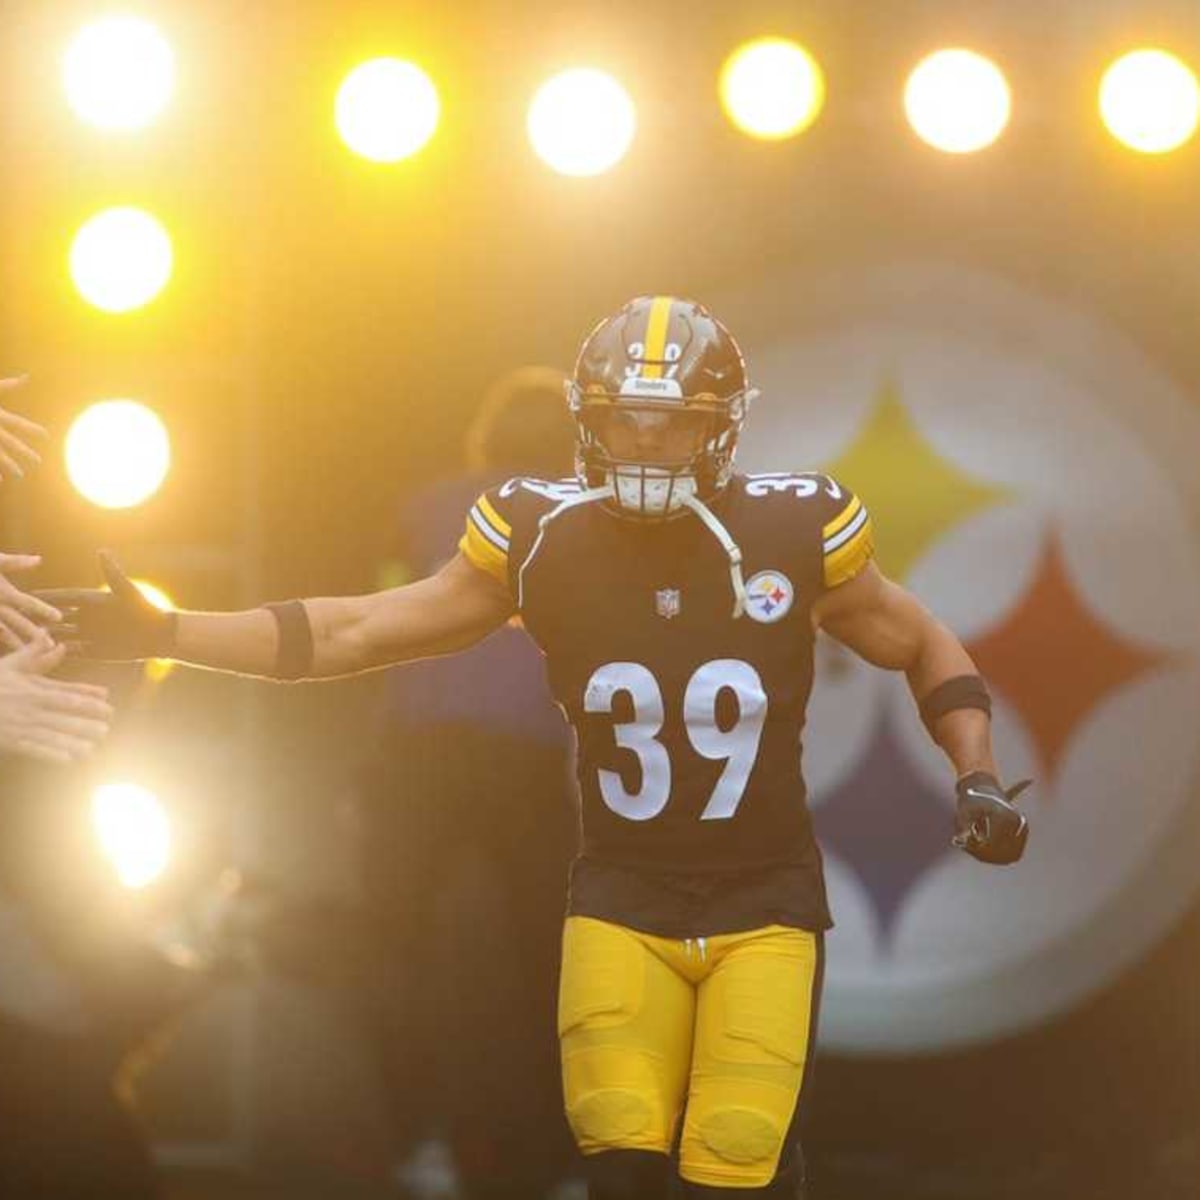 Steelers' Minkah Fitzpatrick (knee) set to play vs. Dolphins: Pro